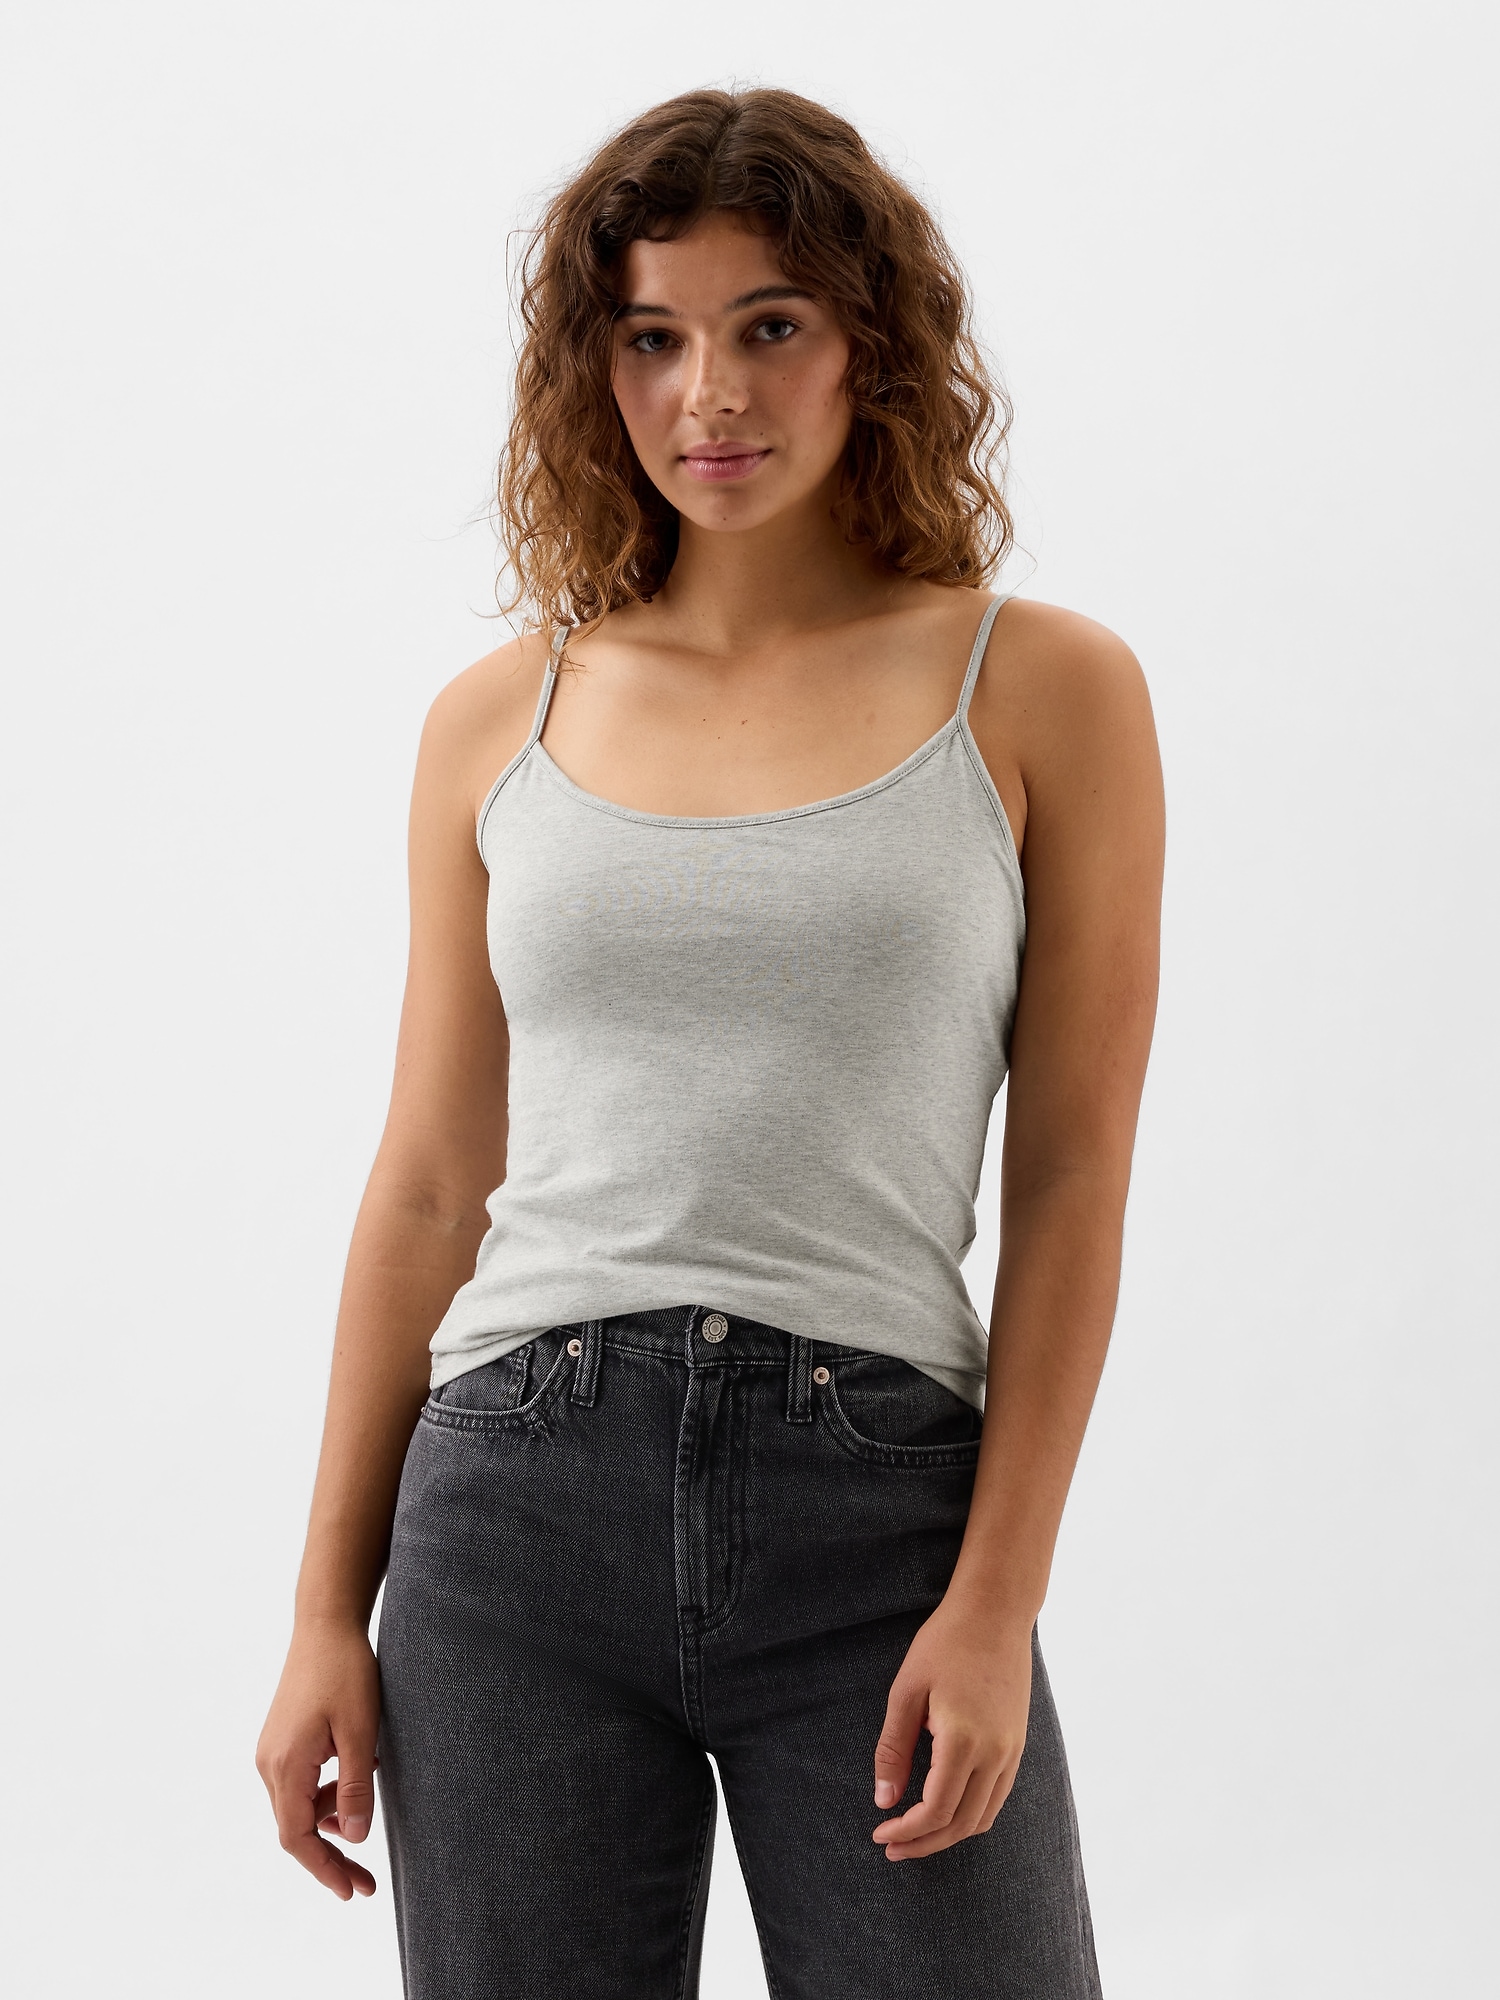 Supportive Camisoles | Gap Factory